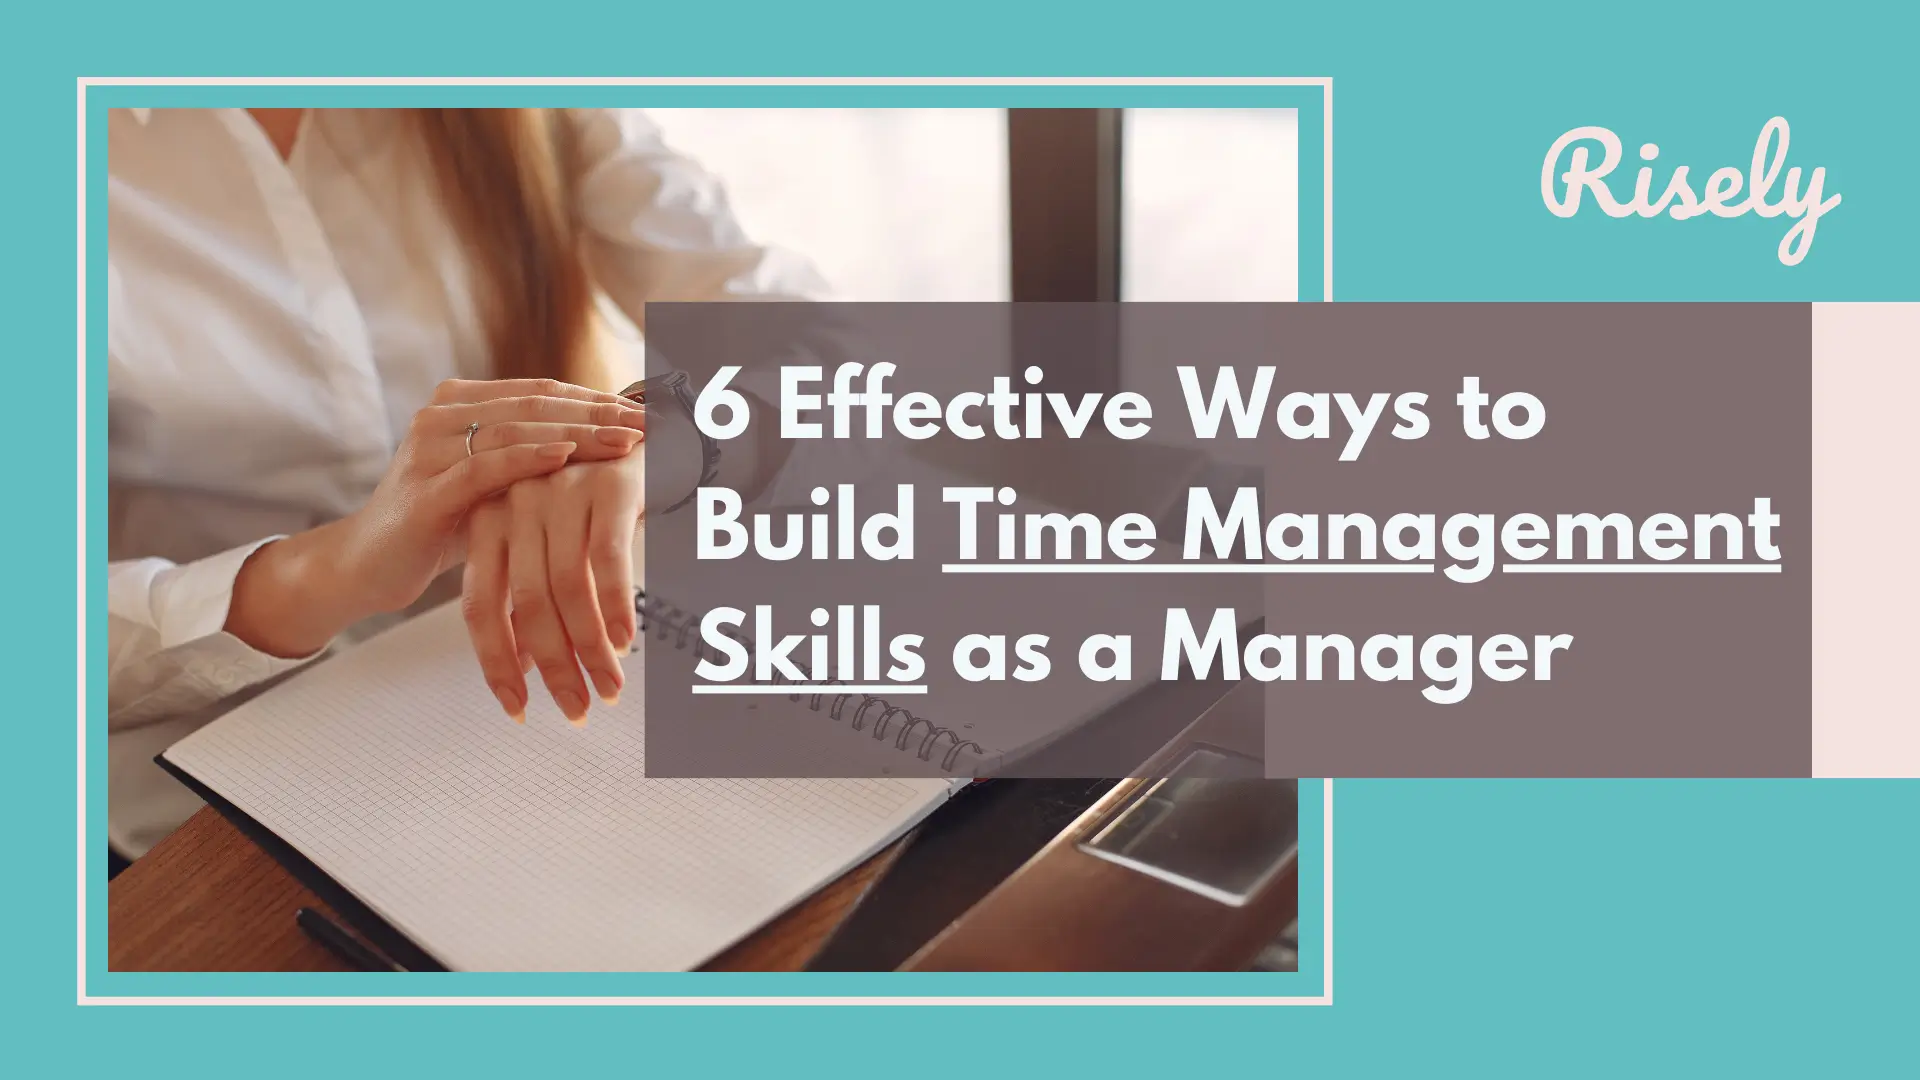 6 Effective Ways to Build Time Management Skills as a Manager